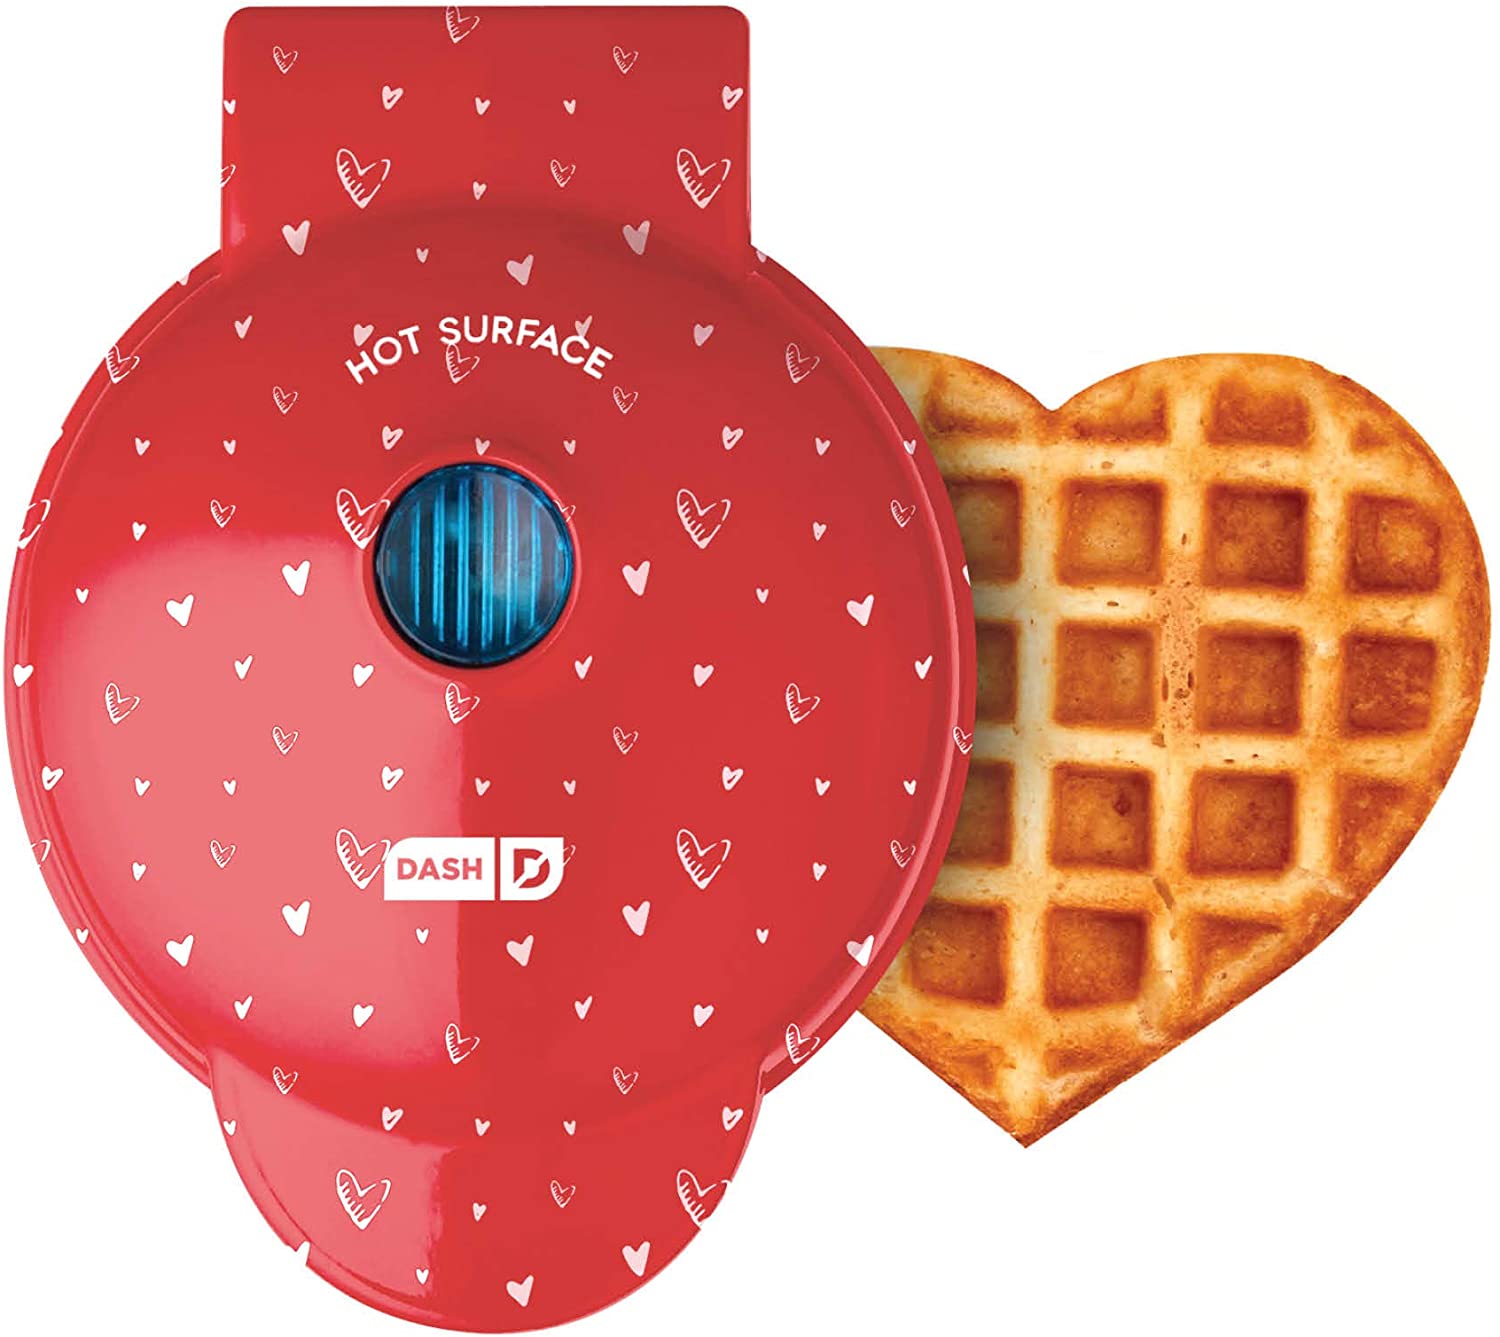 Dash DMWH100HP Machine for Individual, Paninis, Hash Browns, & other Mini waffle maker, 4 inch, Red Love Heart